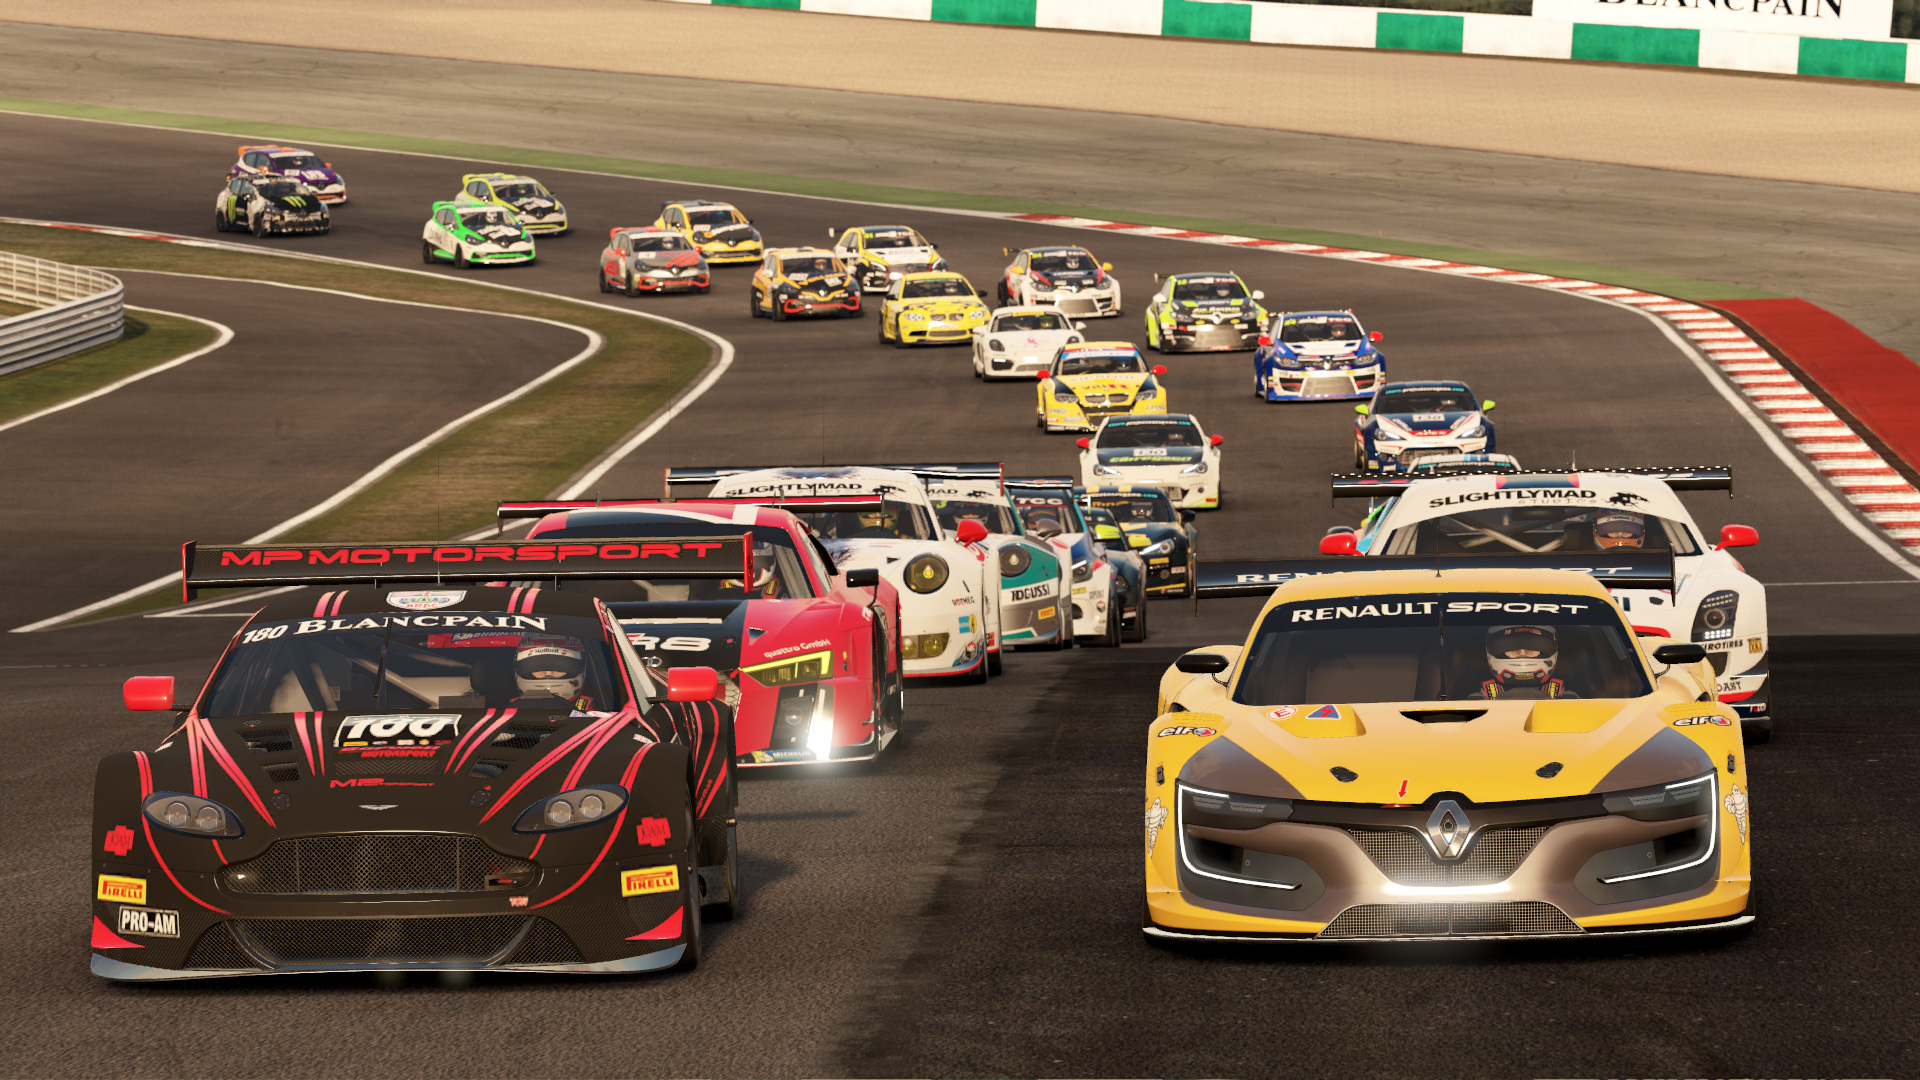 The Project CARS series is dead, killed by EA November 2022